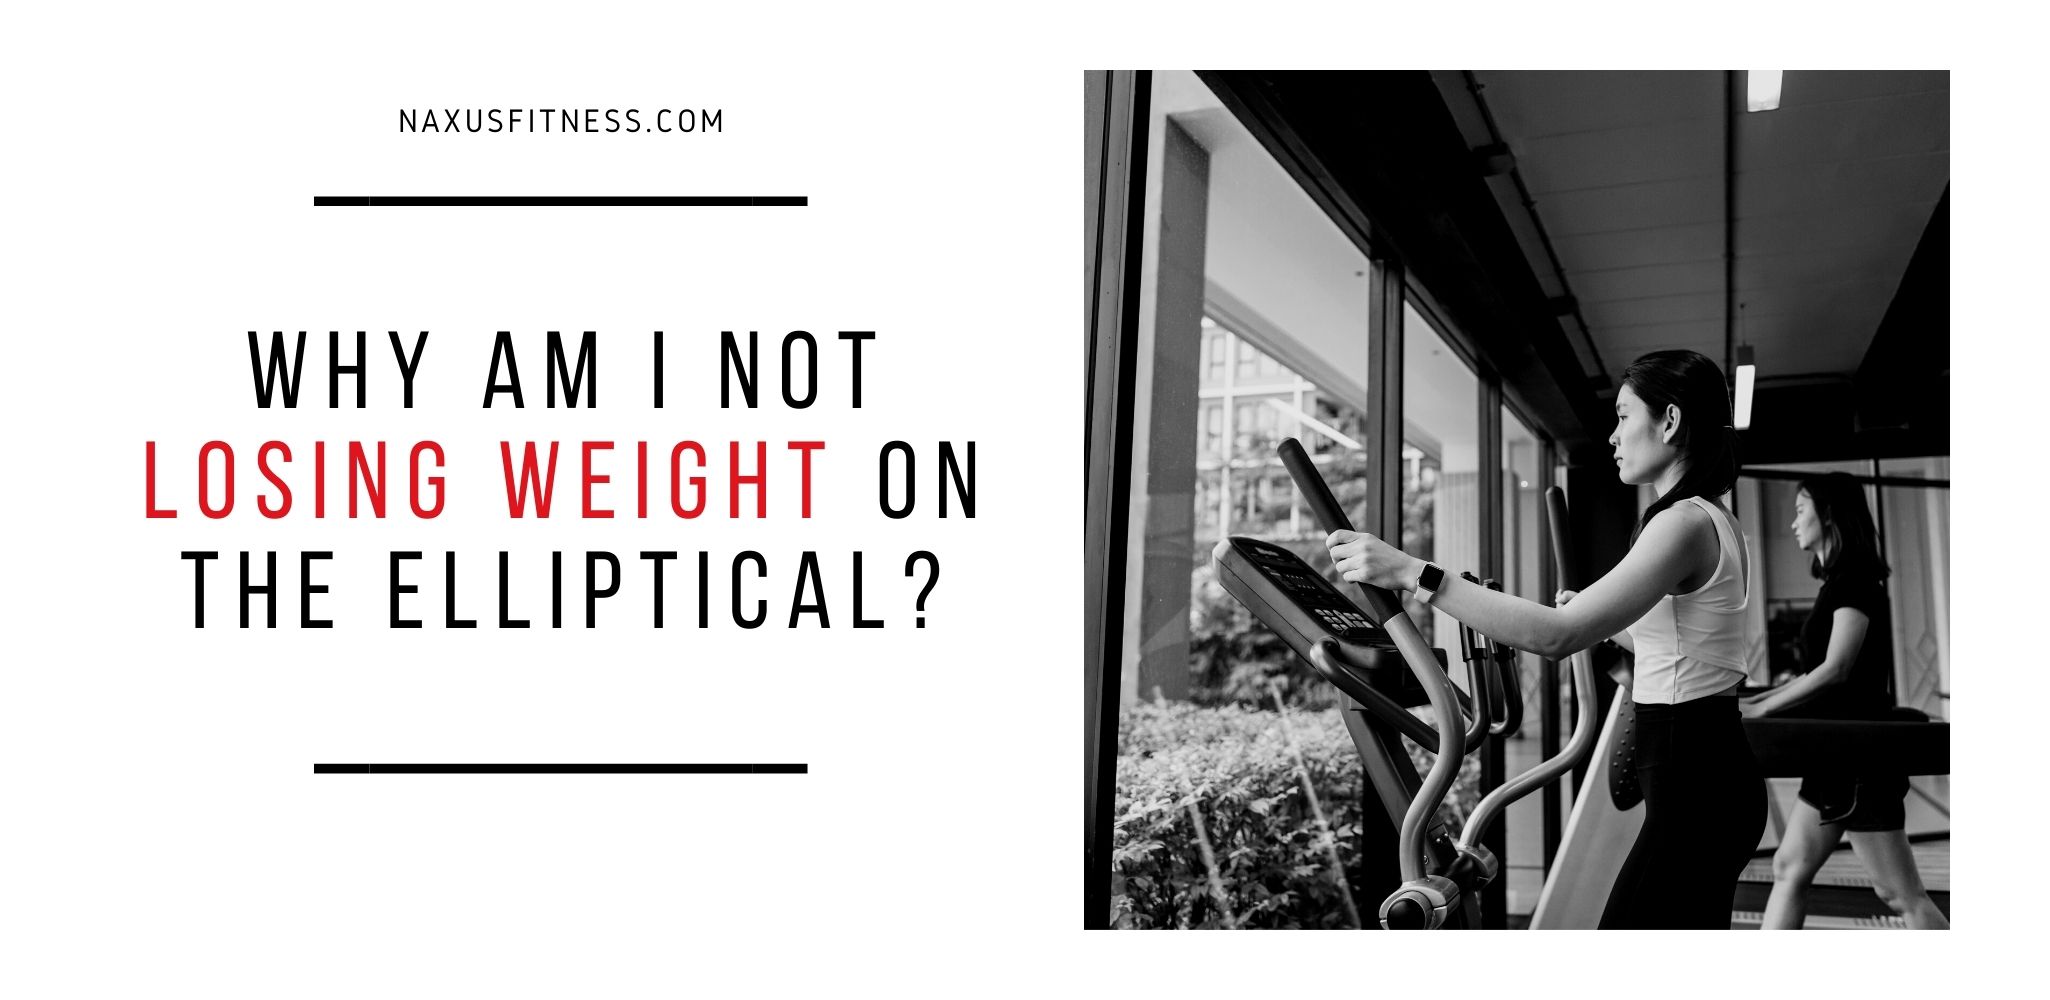 Why am I not losing weight on the elliptical?